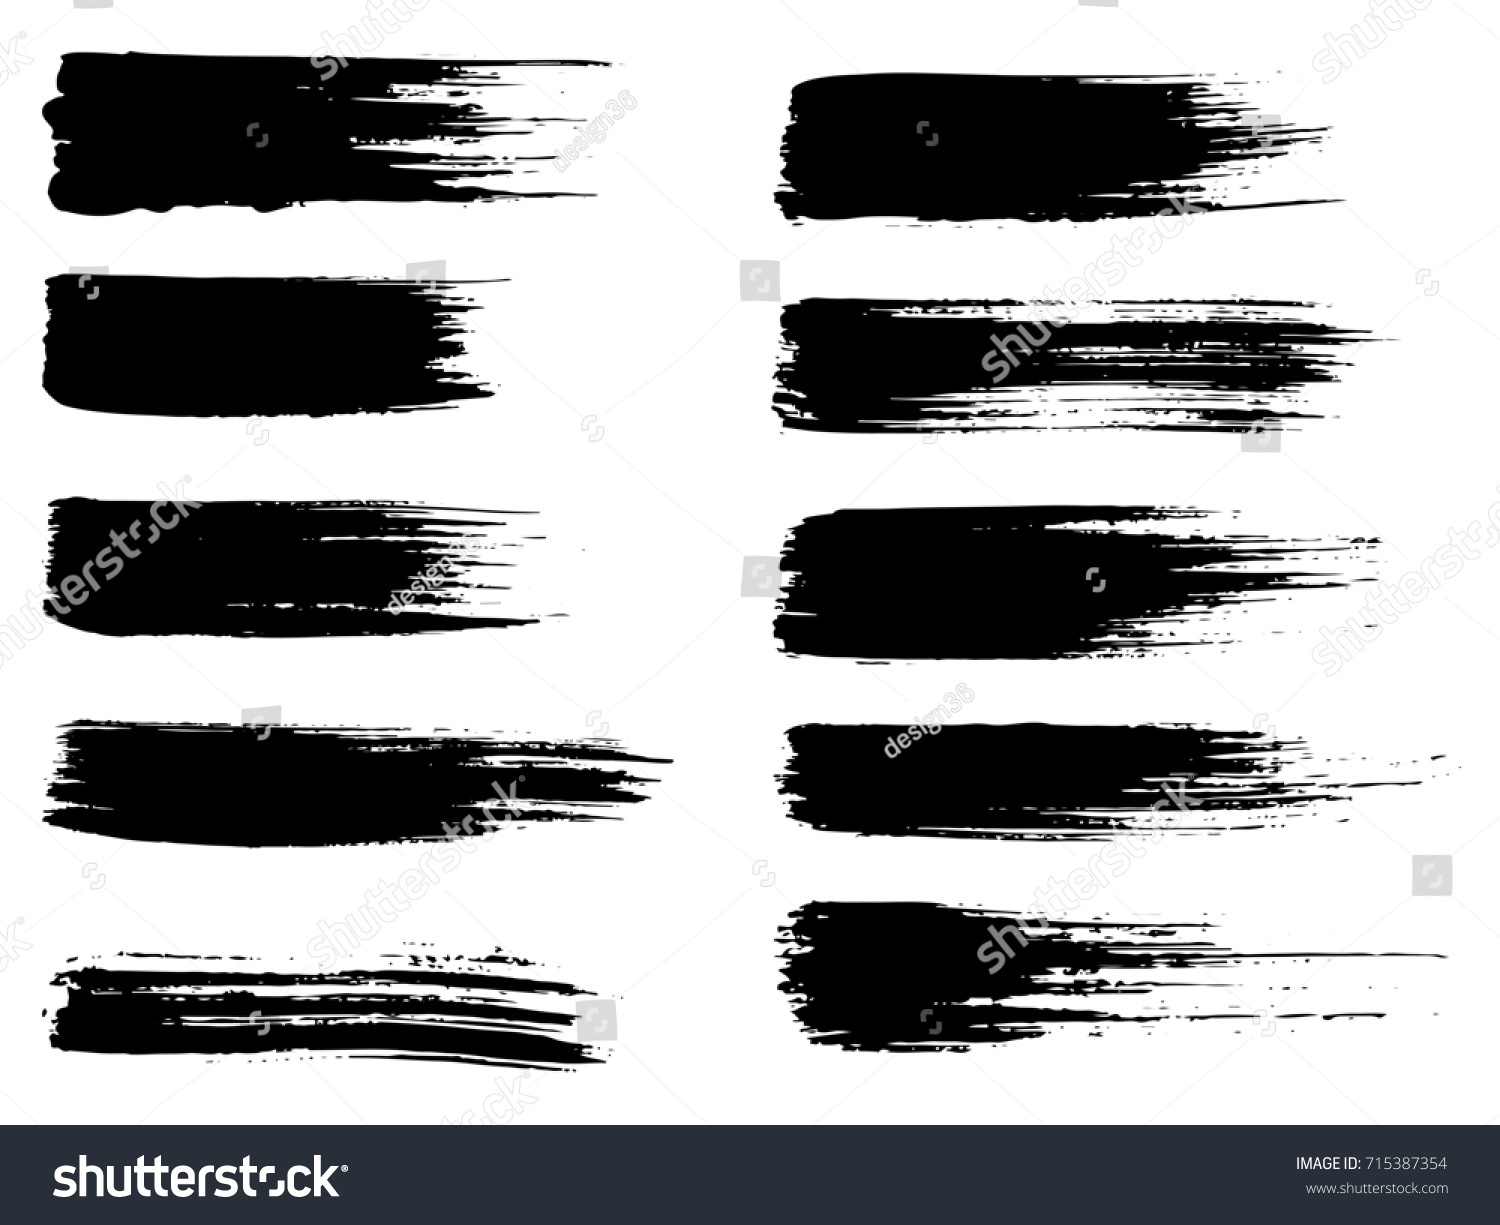 Collection of artistic grungy black paint hand made creative brush stroke set isolated on white background. A group of abstract grunge sketches for design education or graphic art decoration #715387354